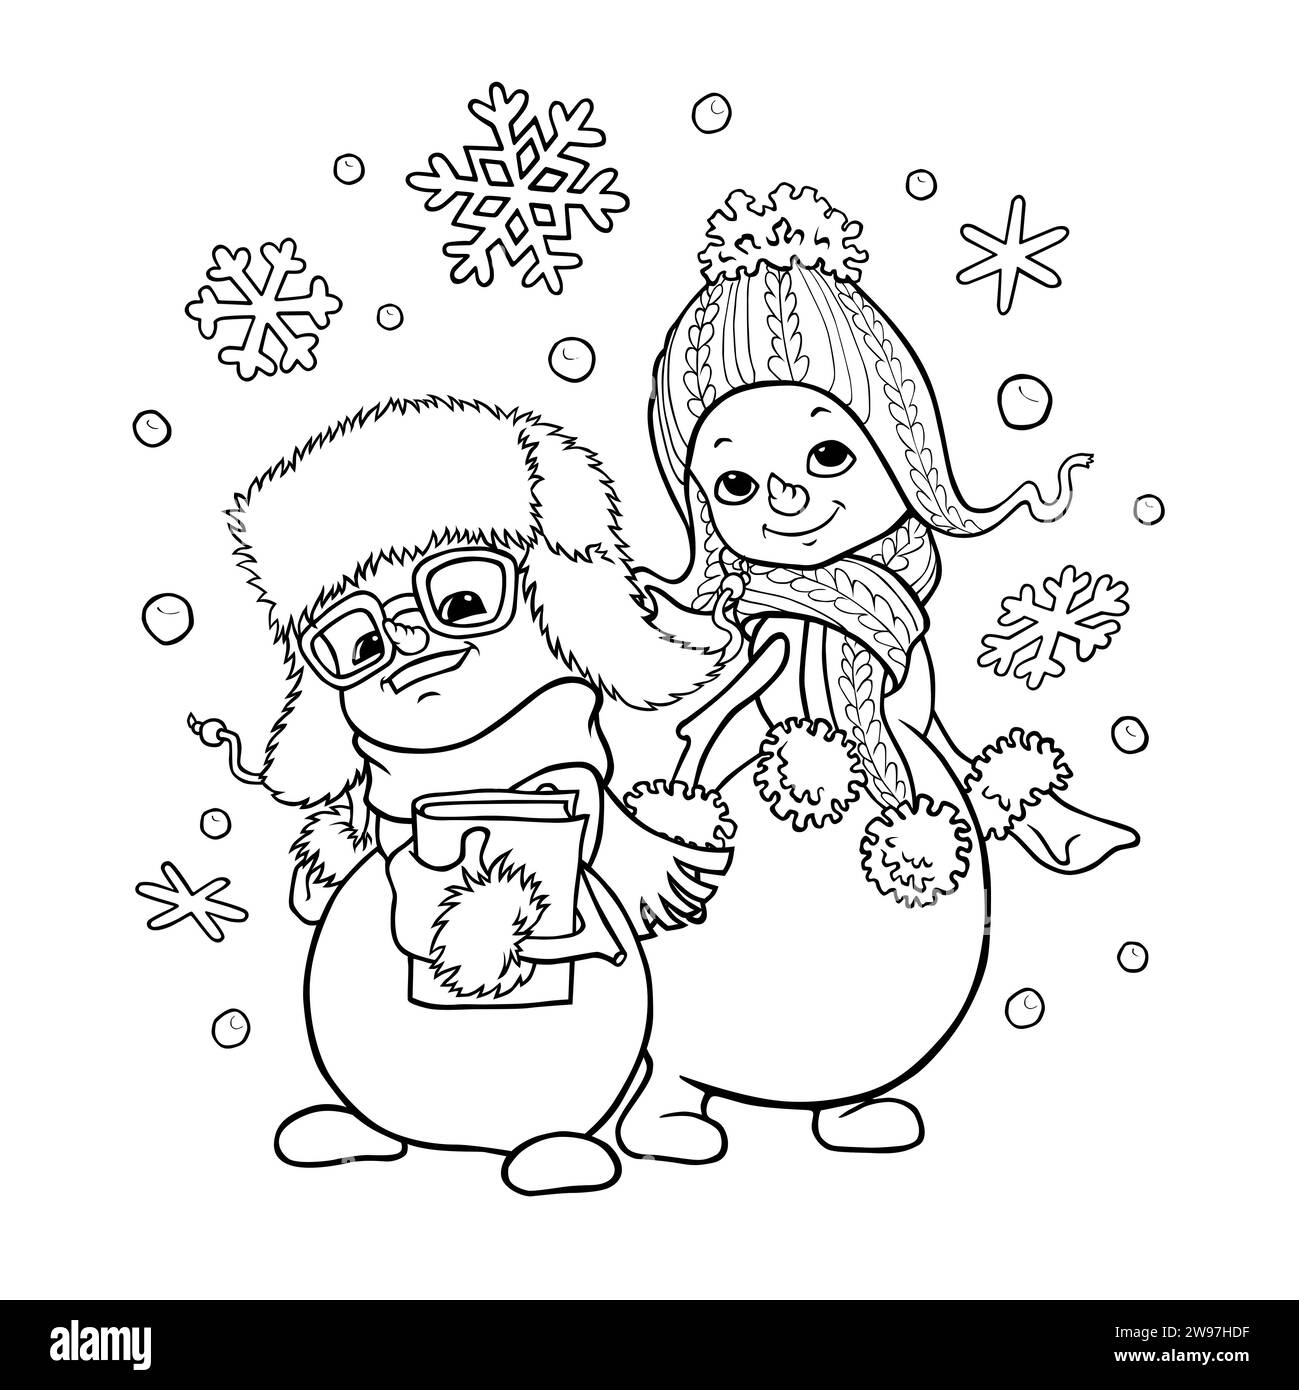 Hand drawn coloring page with two cute cartoon snowmen characters in warm winter clothes surrounded by snowflakes. Stock Photo